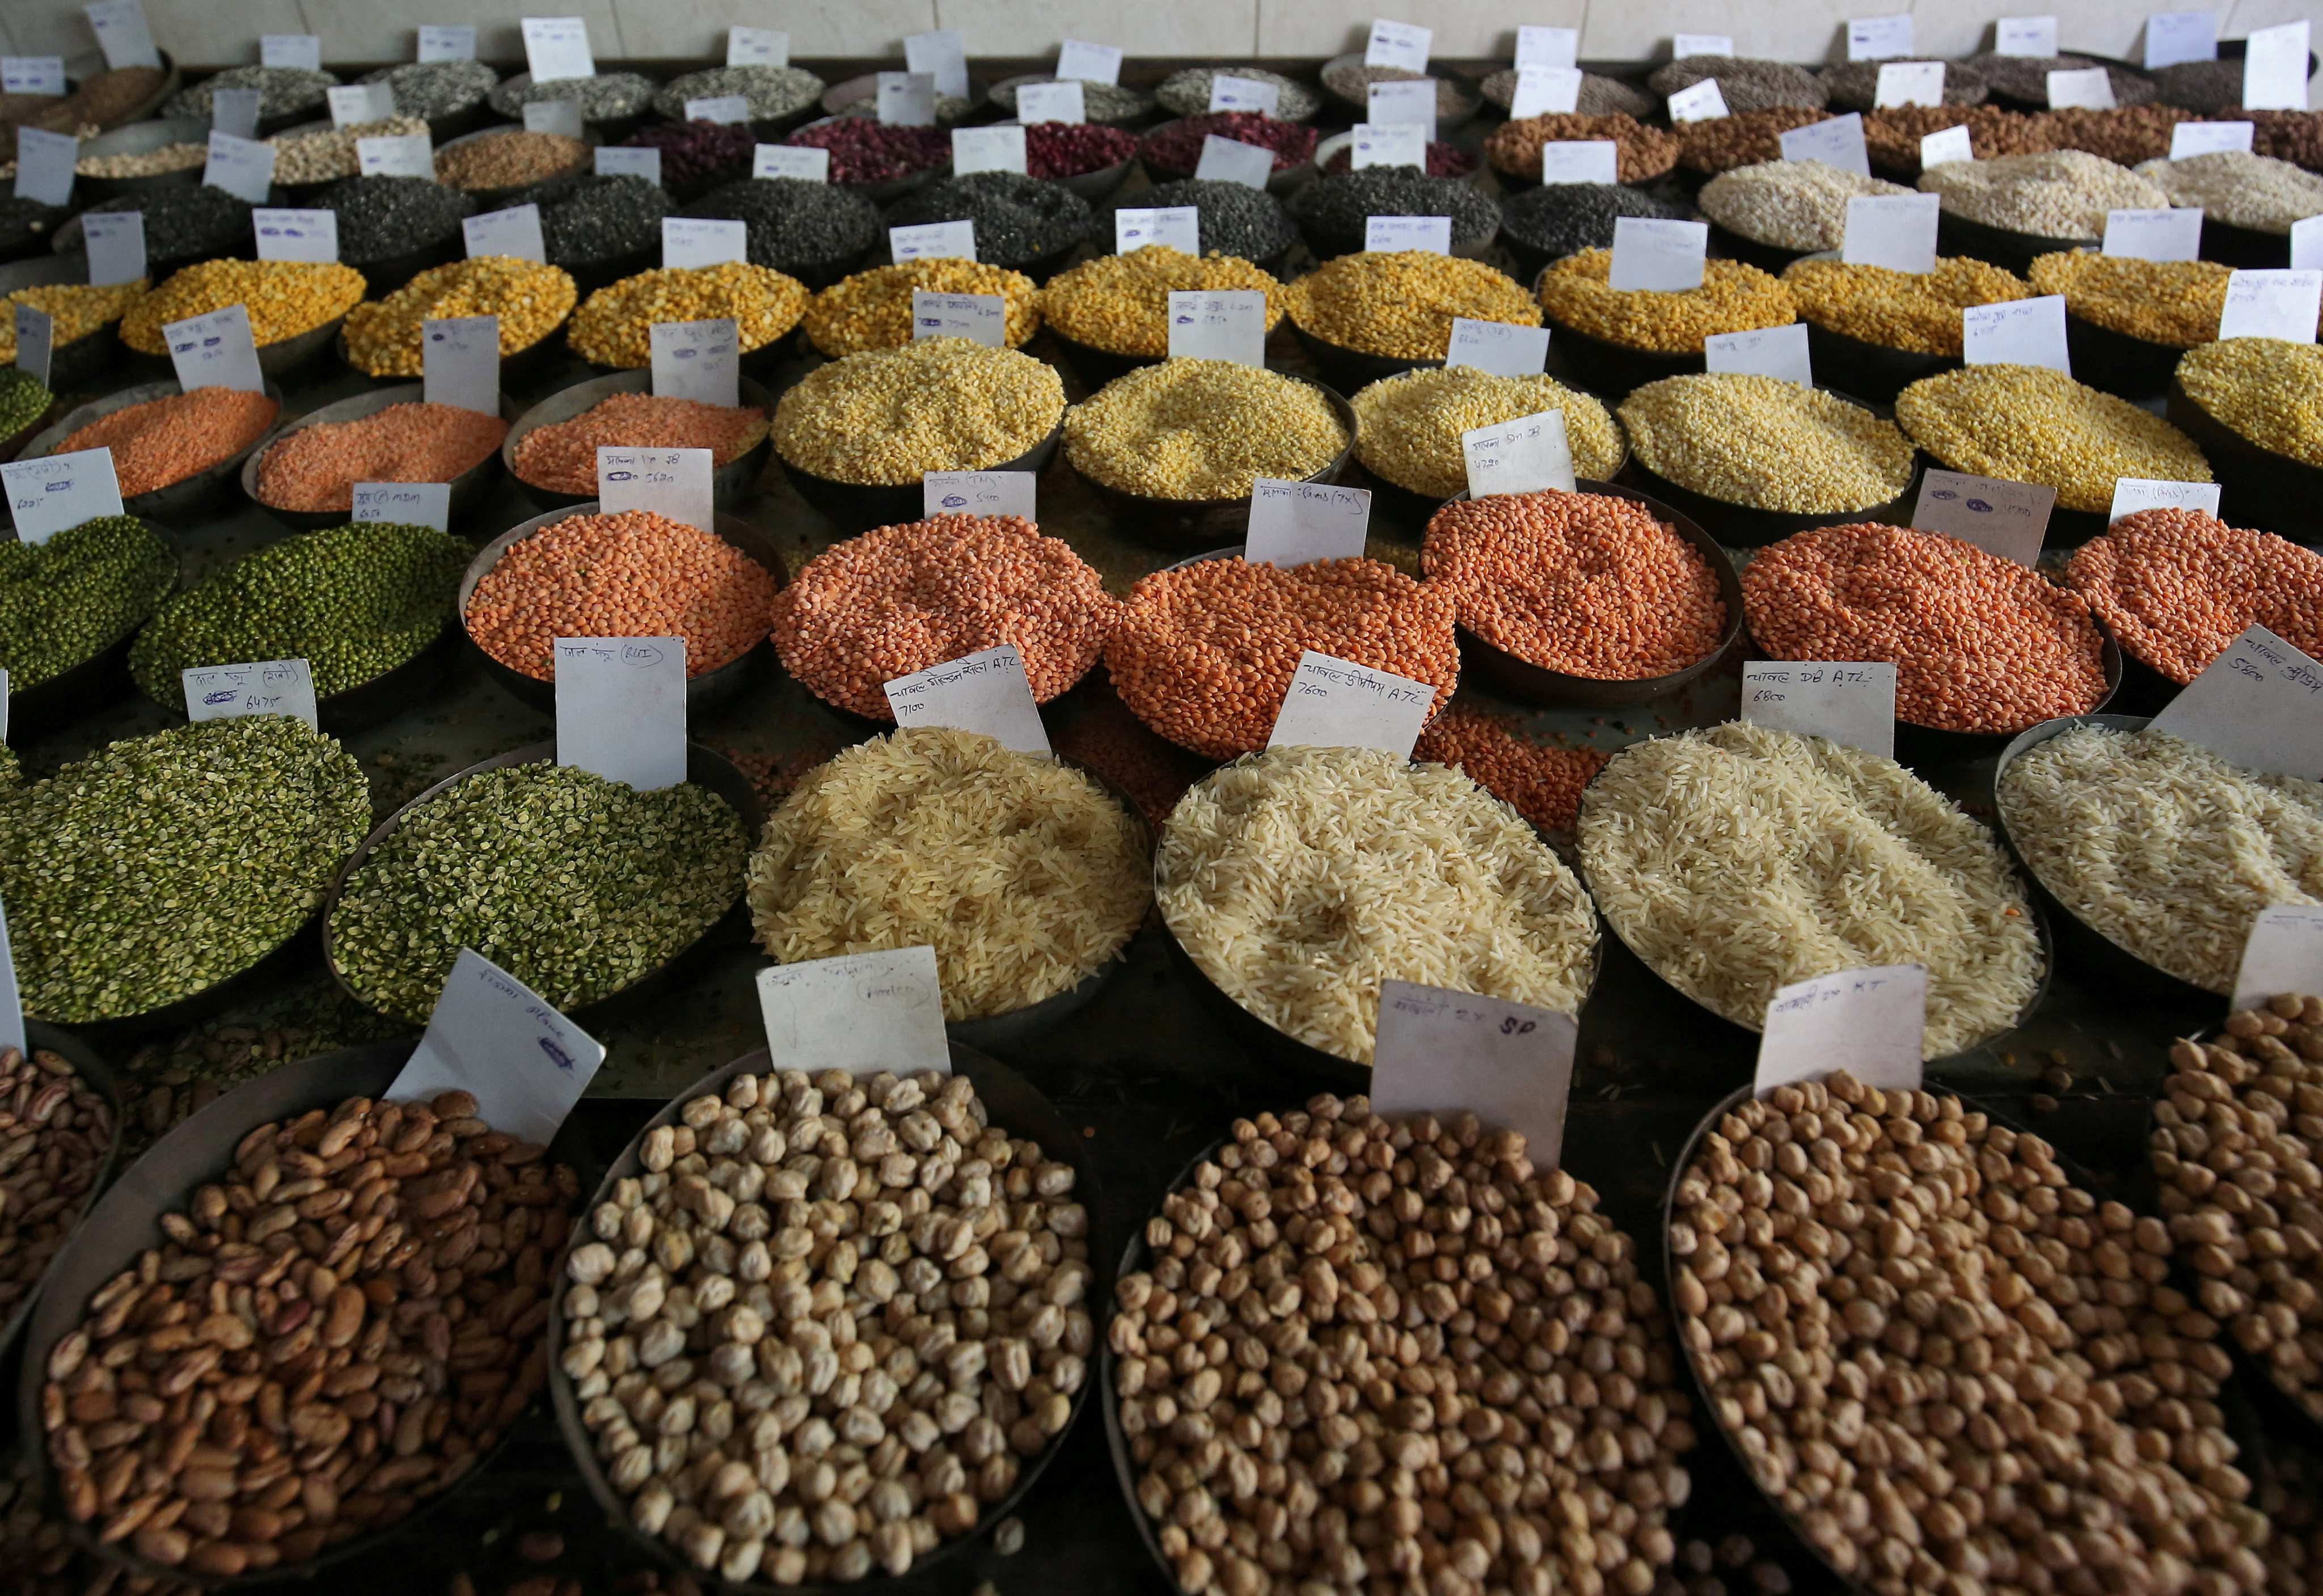 Price tags are displayed on bags of rice and lentils at a wholesale market in New Delhi. Photo: Reuters